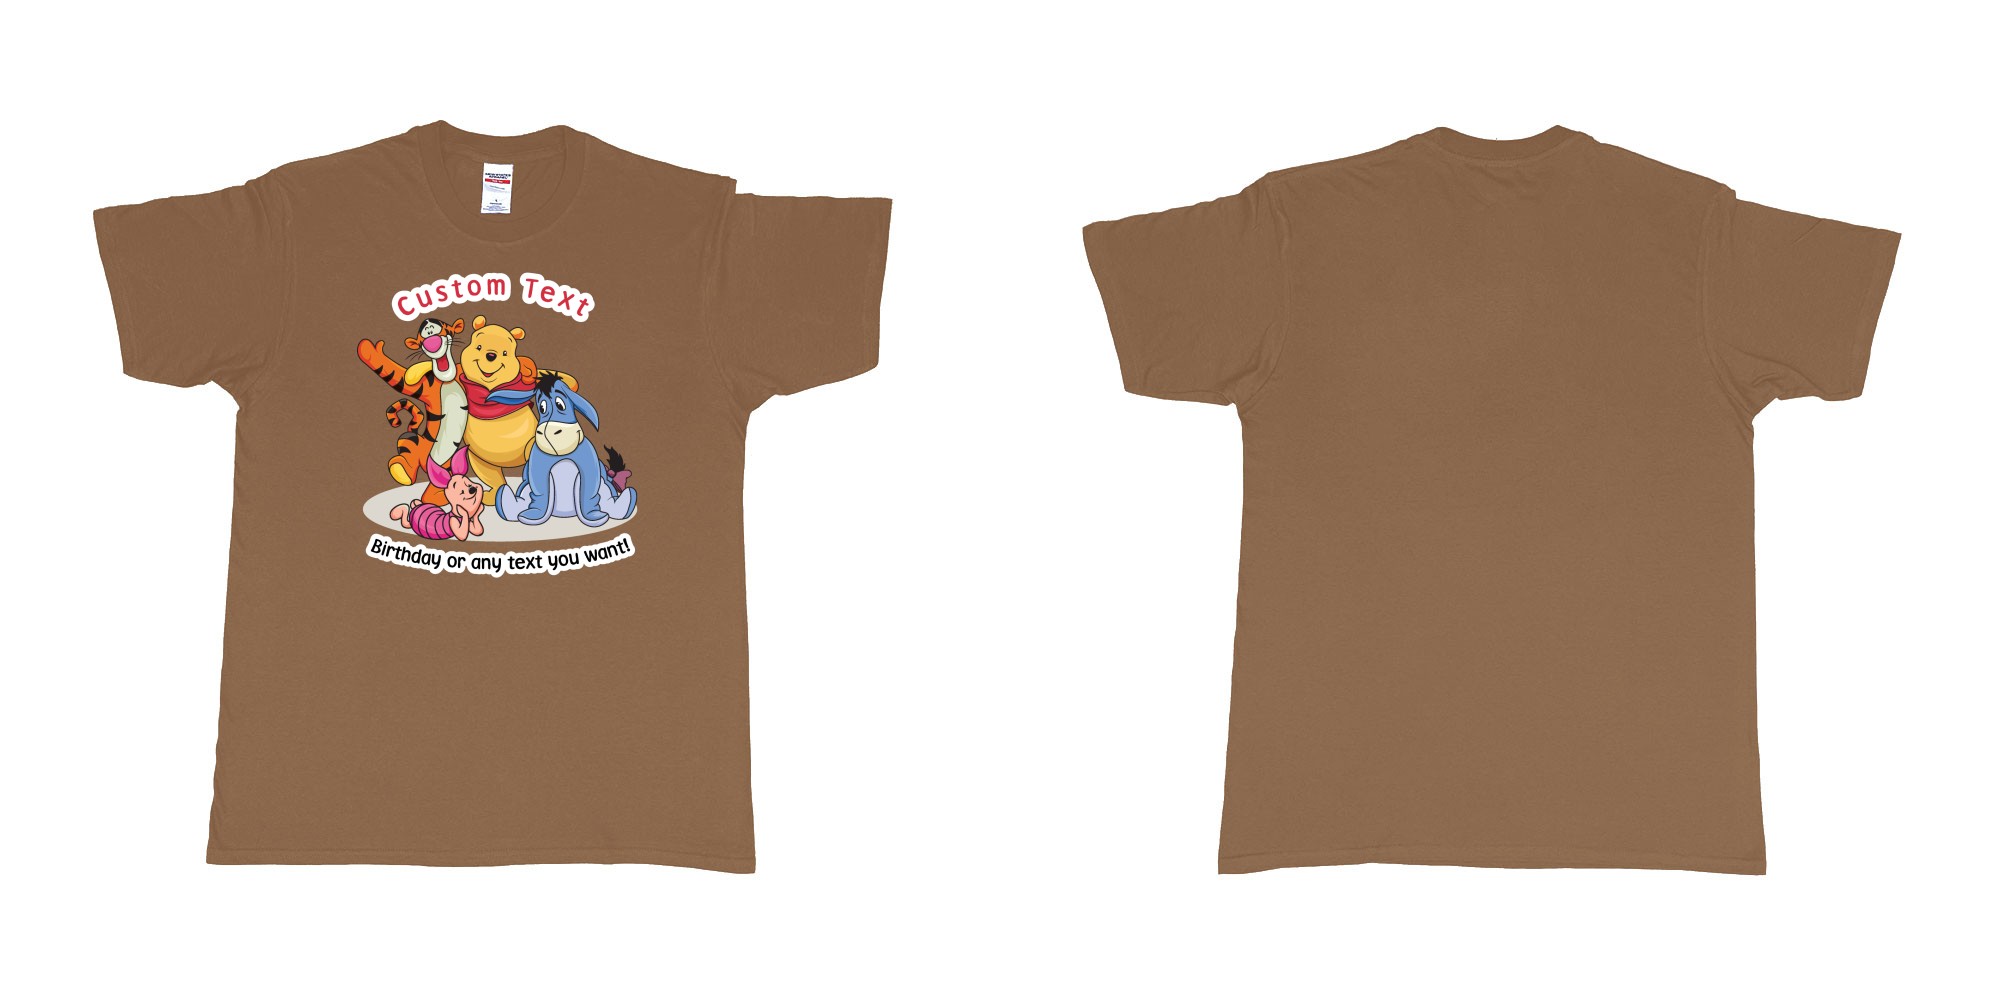 Custom tshirt design winnie the pooh and friend in fabric color chestnut choice your own text made in Bali by The Pirate Way